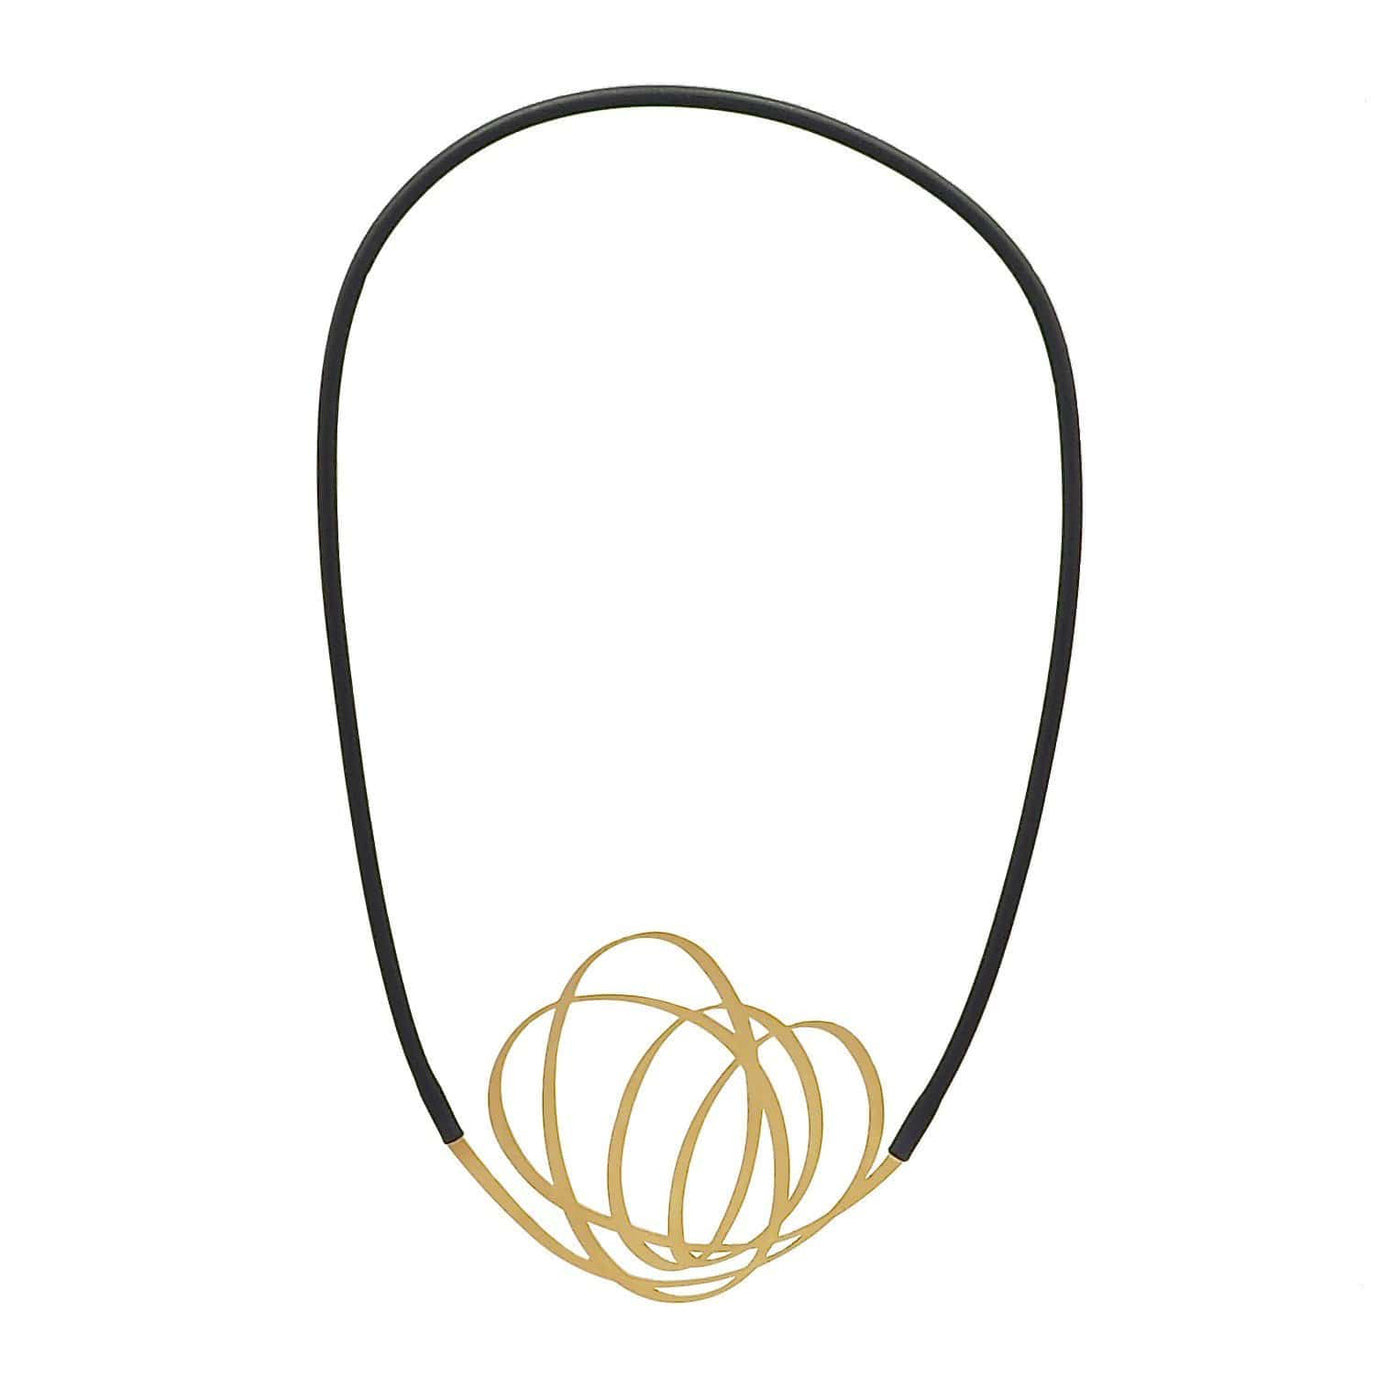 Whirl Necklace - Black - inSync design